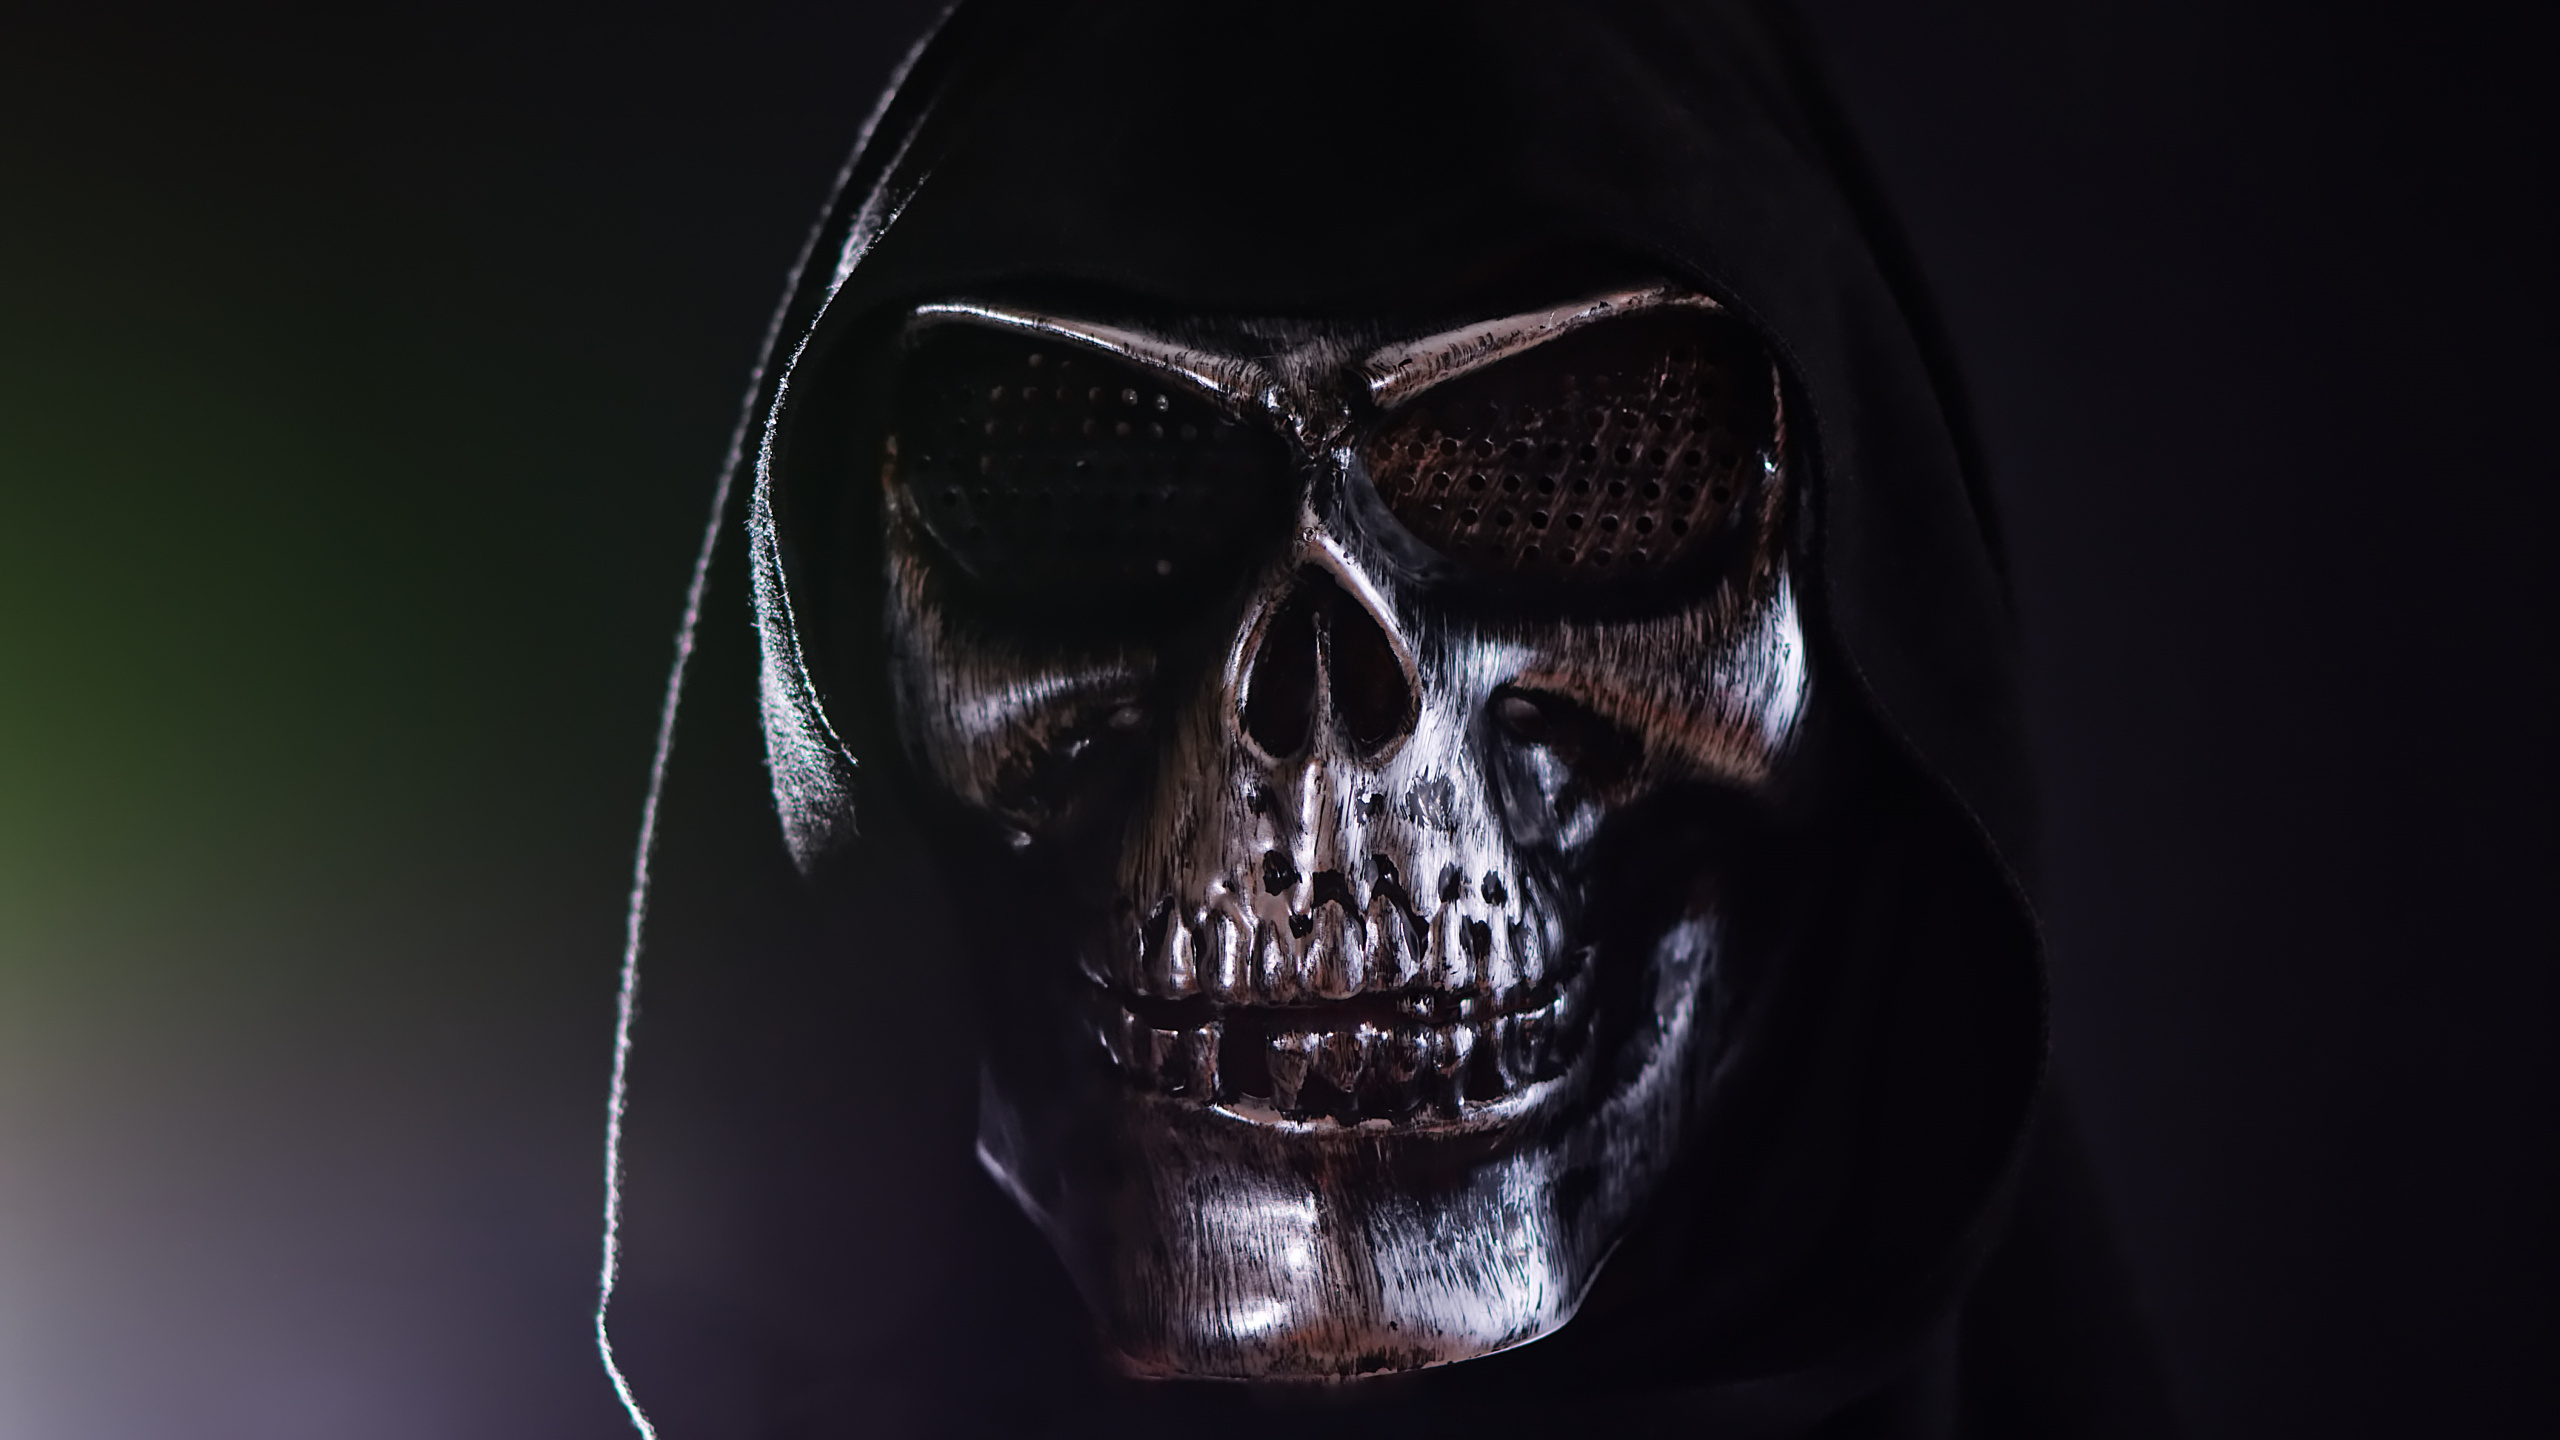 Black and Silver Skull Mask. Wallpaper in 2560x1440 Resolution